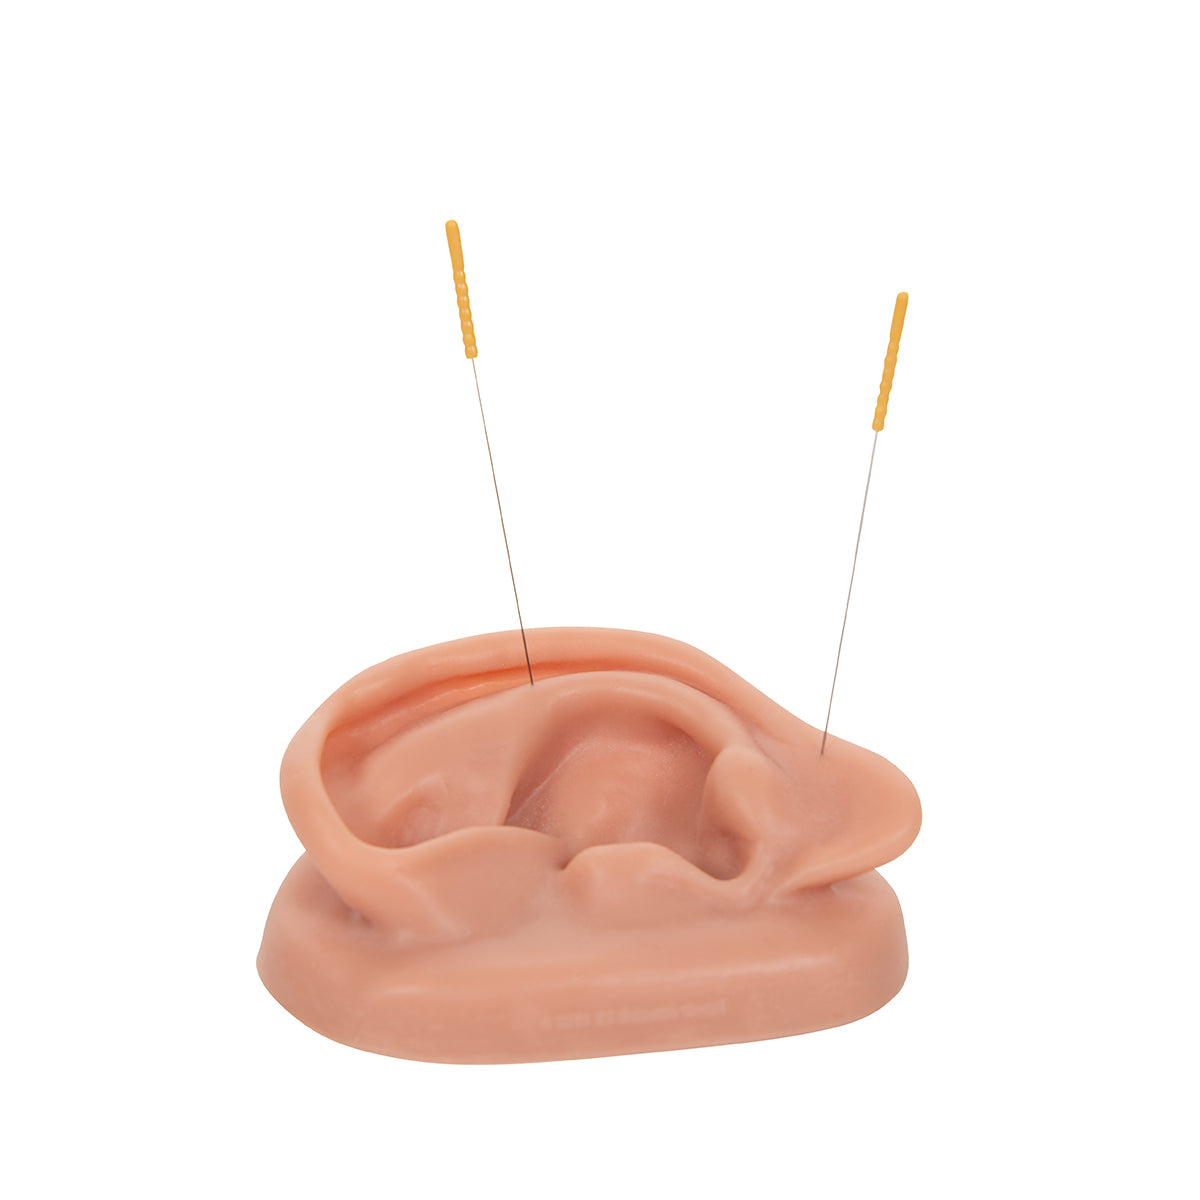 2 pcs. acupuncturists in SKINlike (tm) silicone in normal size